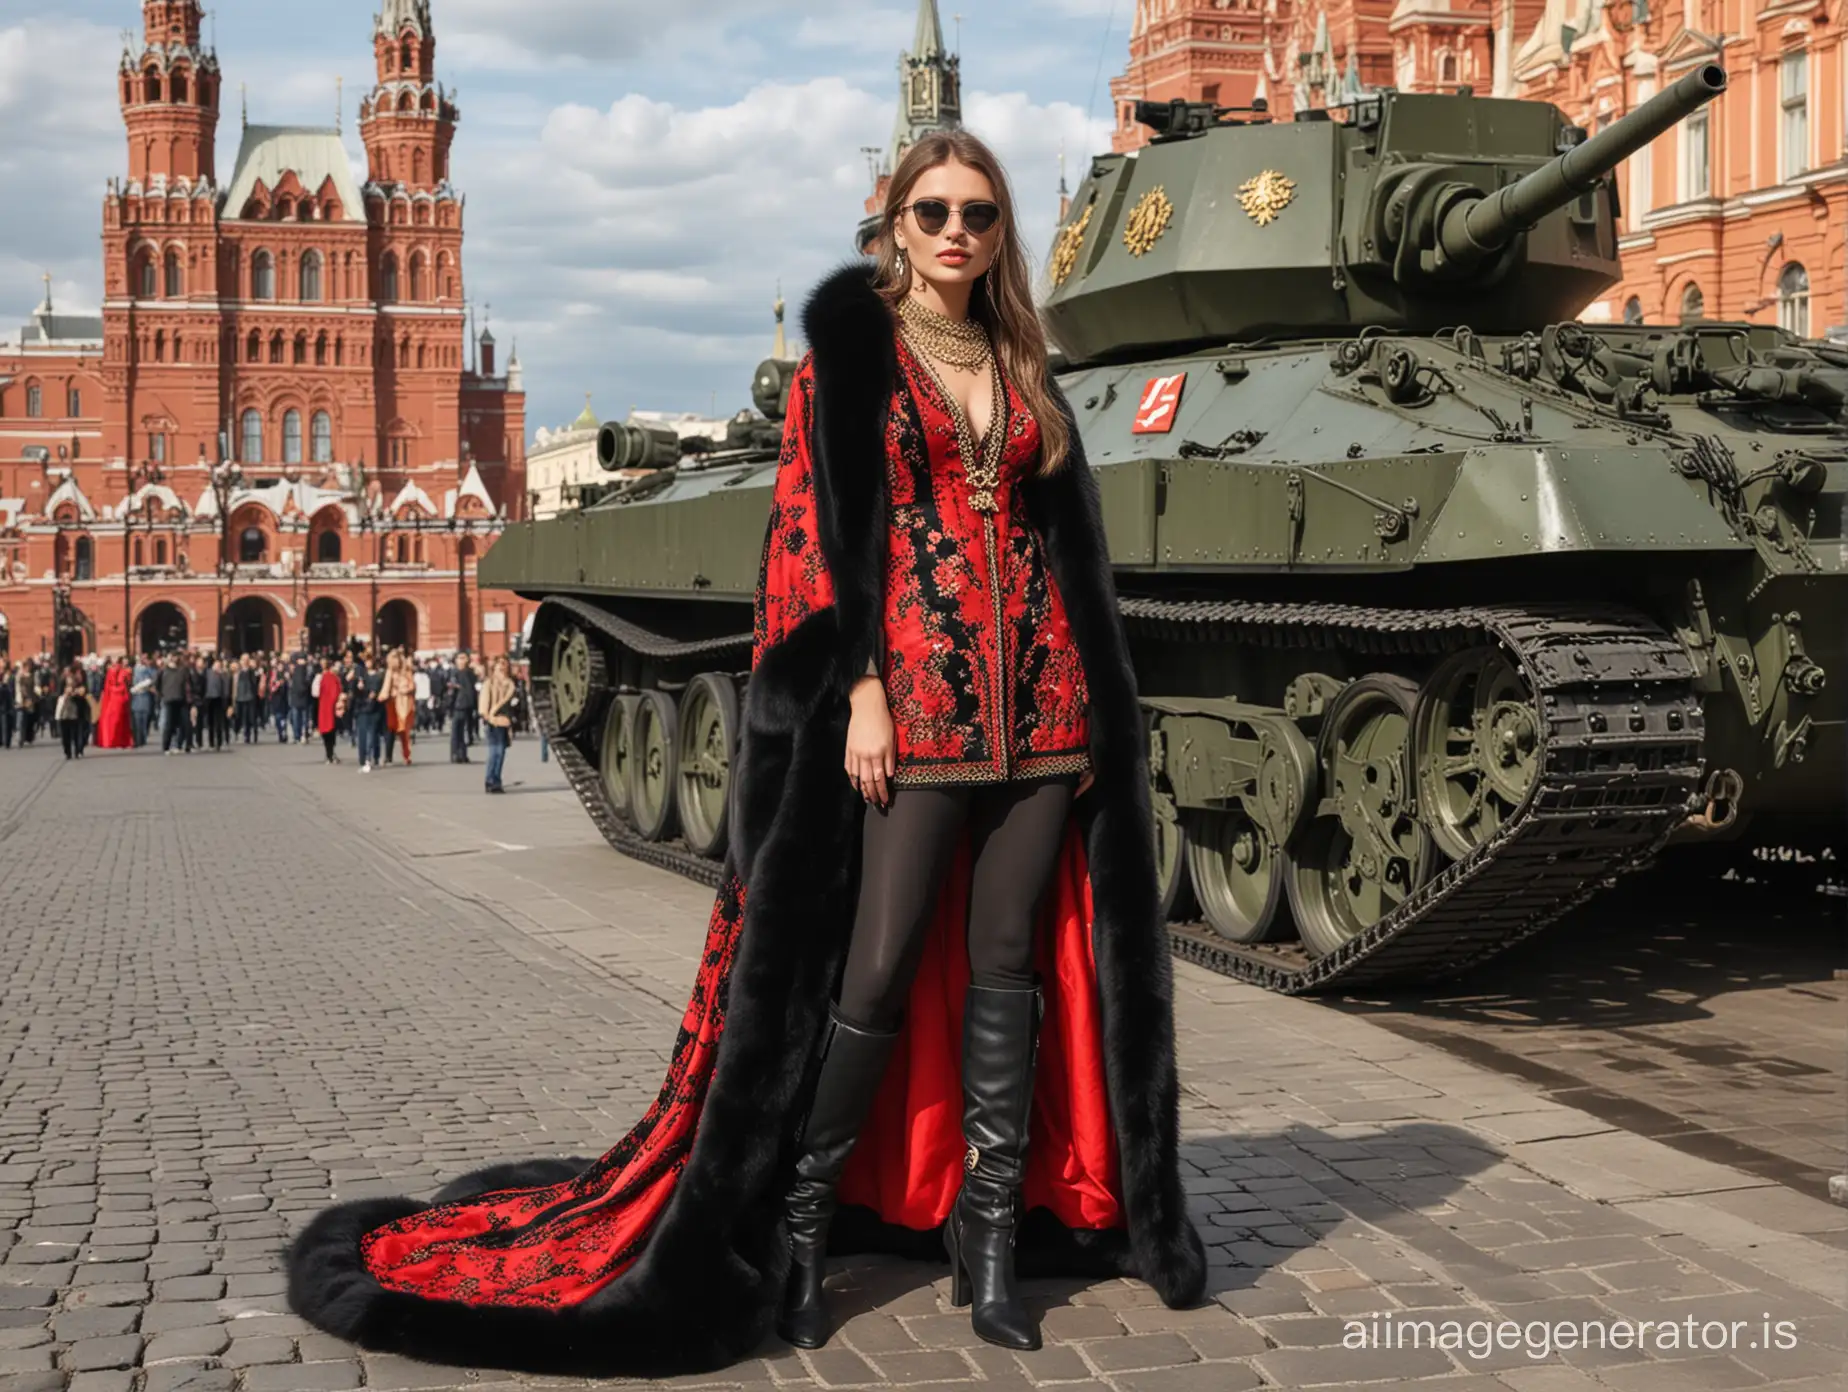 Fashionable-Russian-Woman-in-Red-Silk-Dress-and-Fur-Chapka-by-Khaki-Tank-at-Red-Square-Moscow